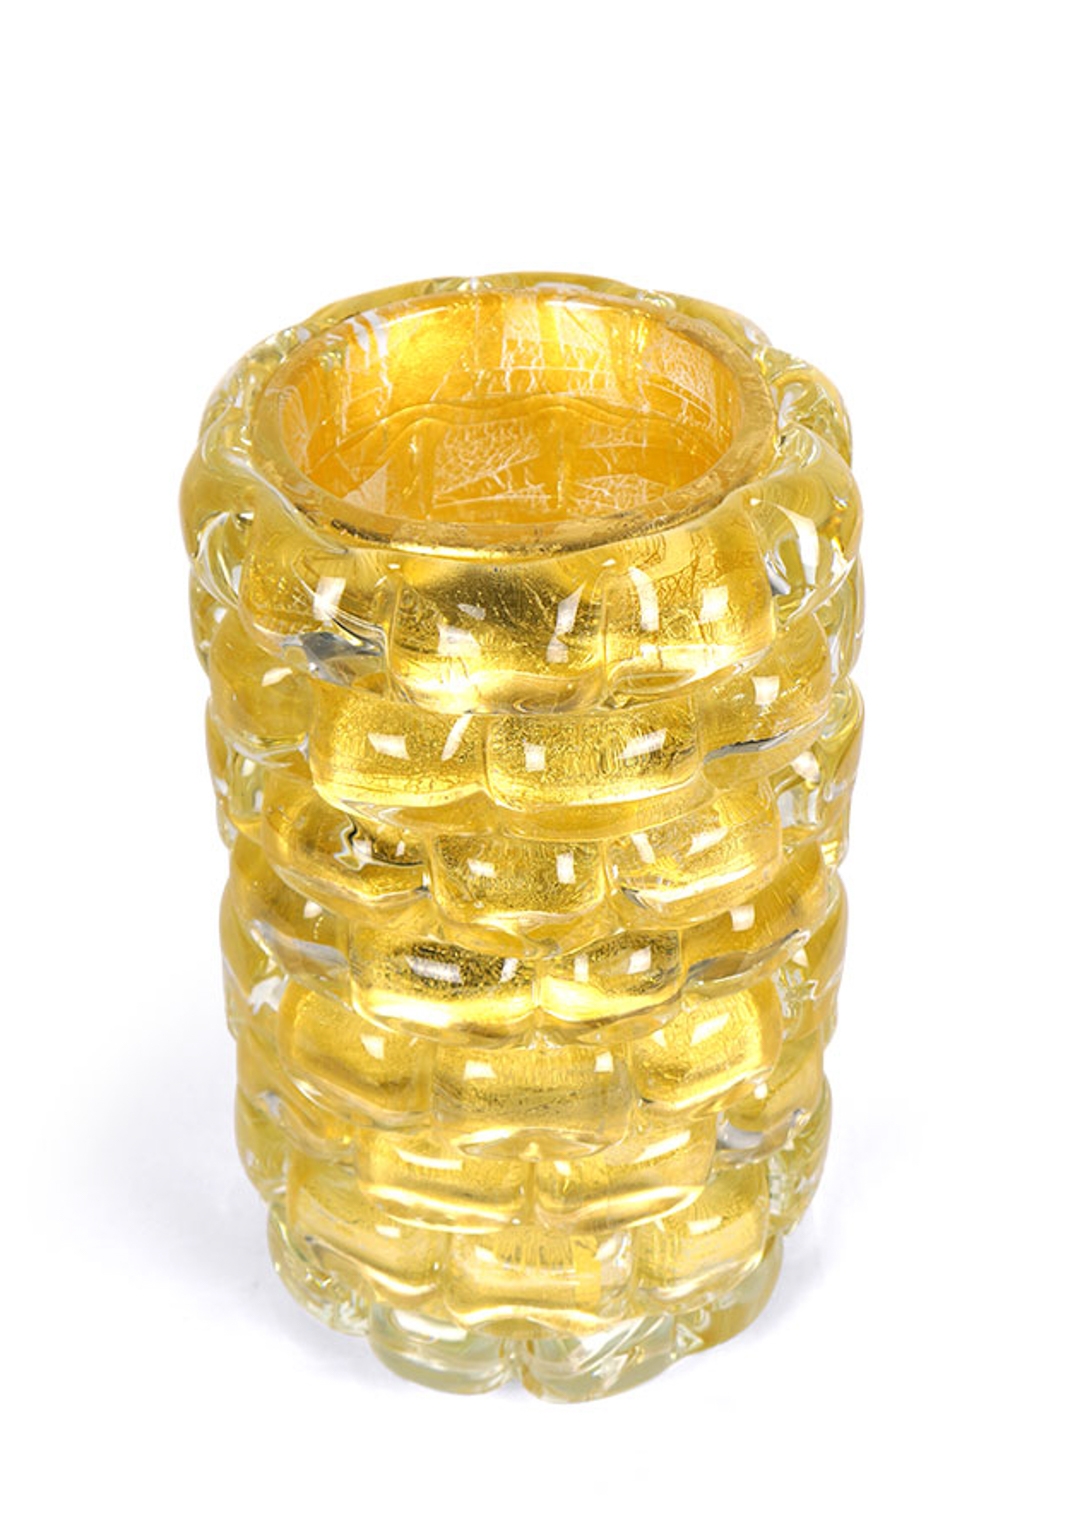 The Wall - Murano Glass Vase Gold Leaf 24kt